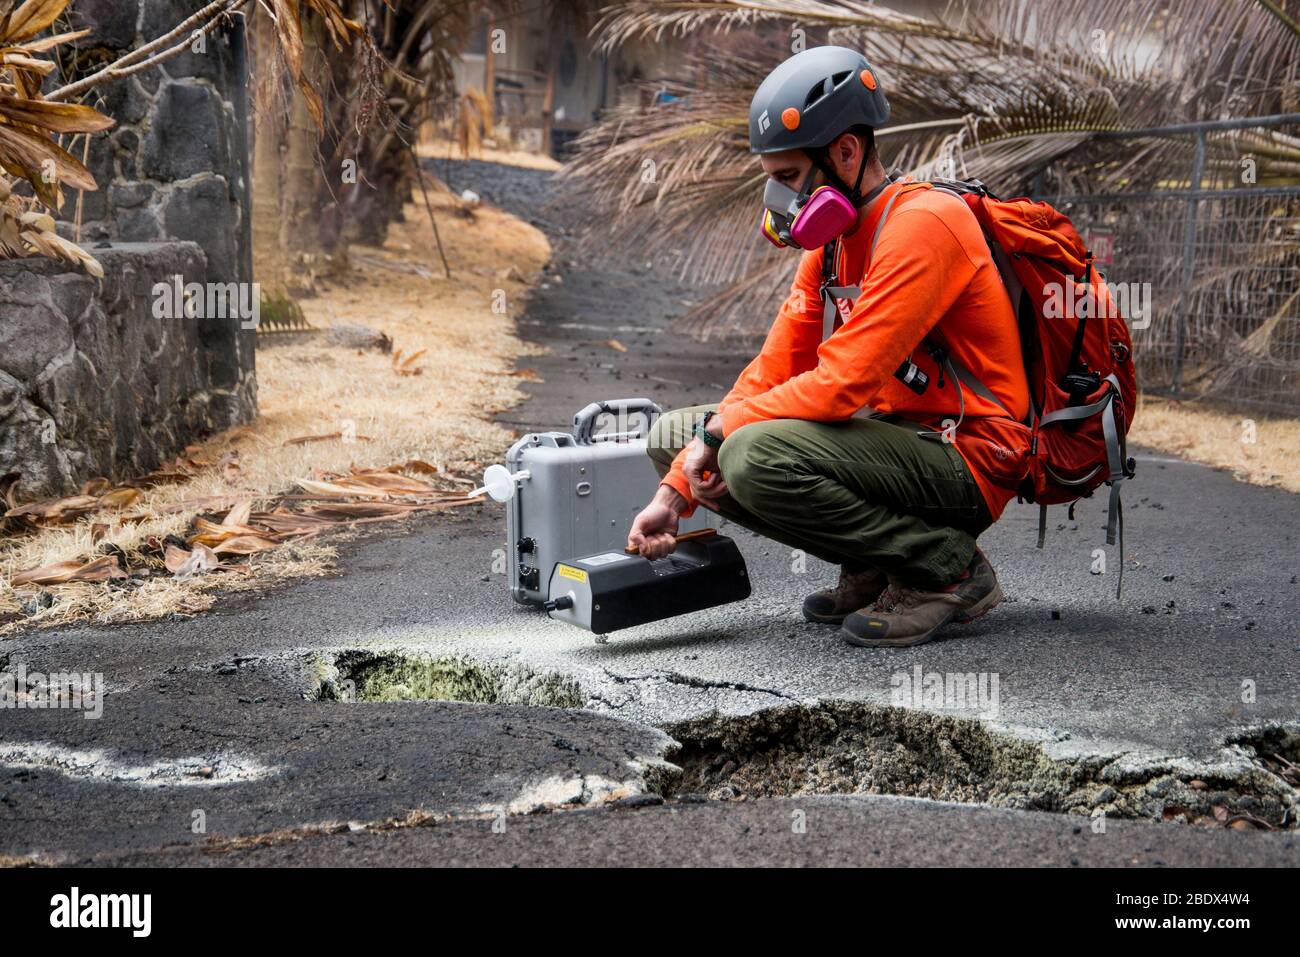 U.S. Geological Survey (USGS) volunteer Allen Lerner uses a sulfur dioxide (SO2) sensor to test the air quality after the Kīlauea volcanic eruption on May 19, 2018. Note the yellow sulfur deposits on the asphalt around the crack in the street.  The residential area of Leilani Estates has been evacuated due to the high concentration of SO2 emitting from the cracks in the earth that spilled lava into the subdivisions. Stock Photo